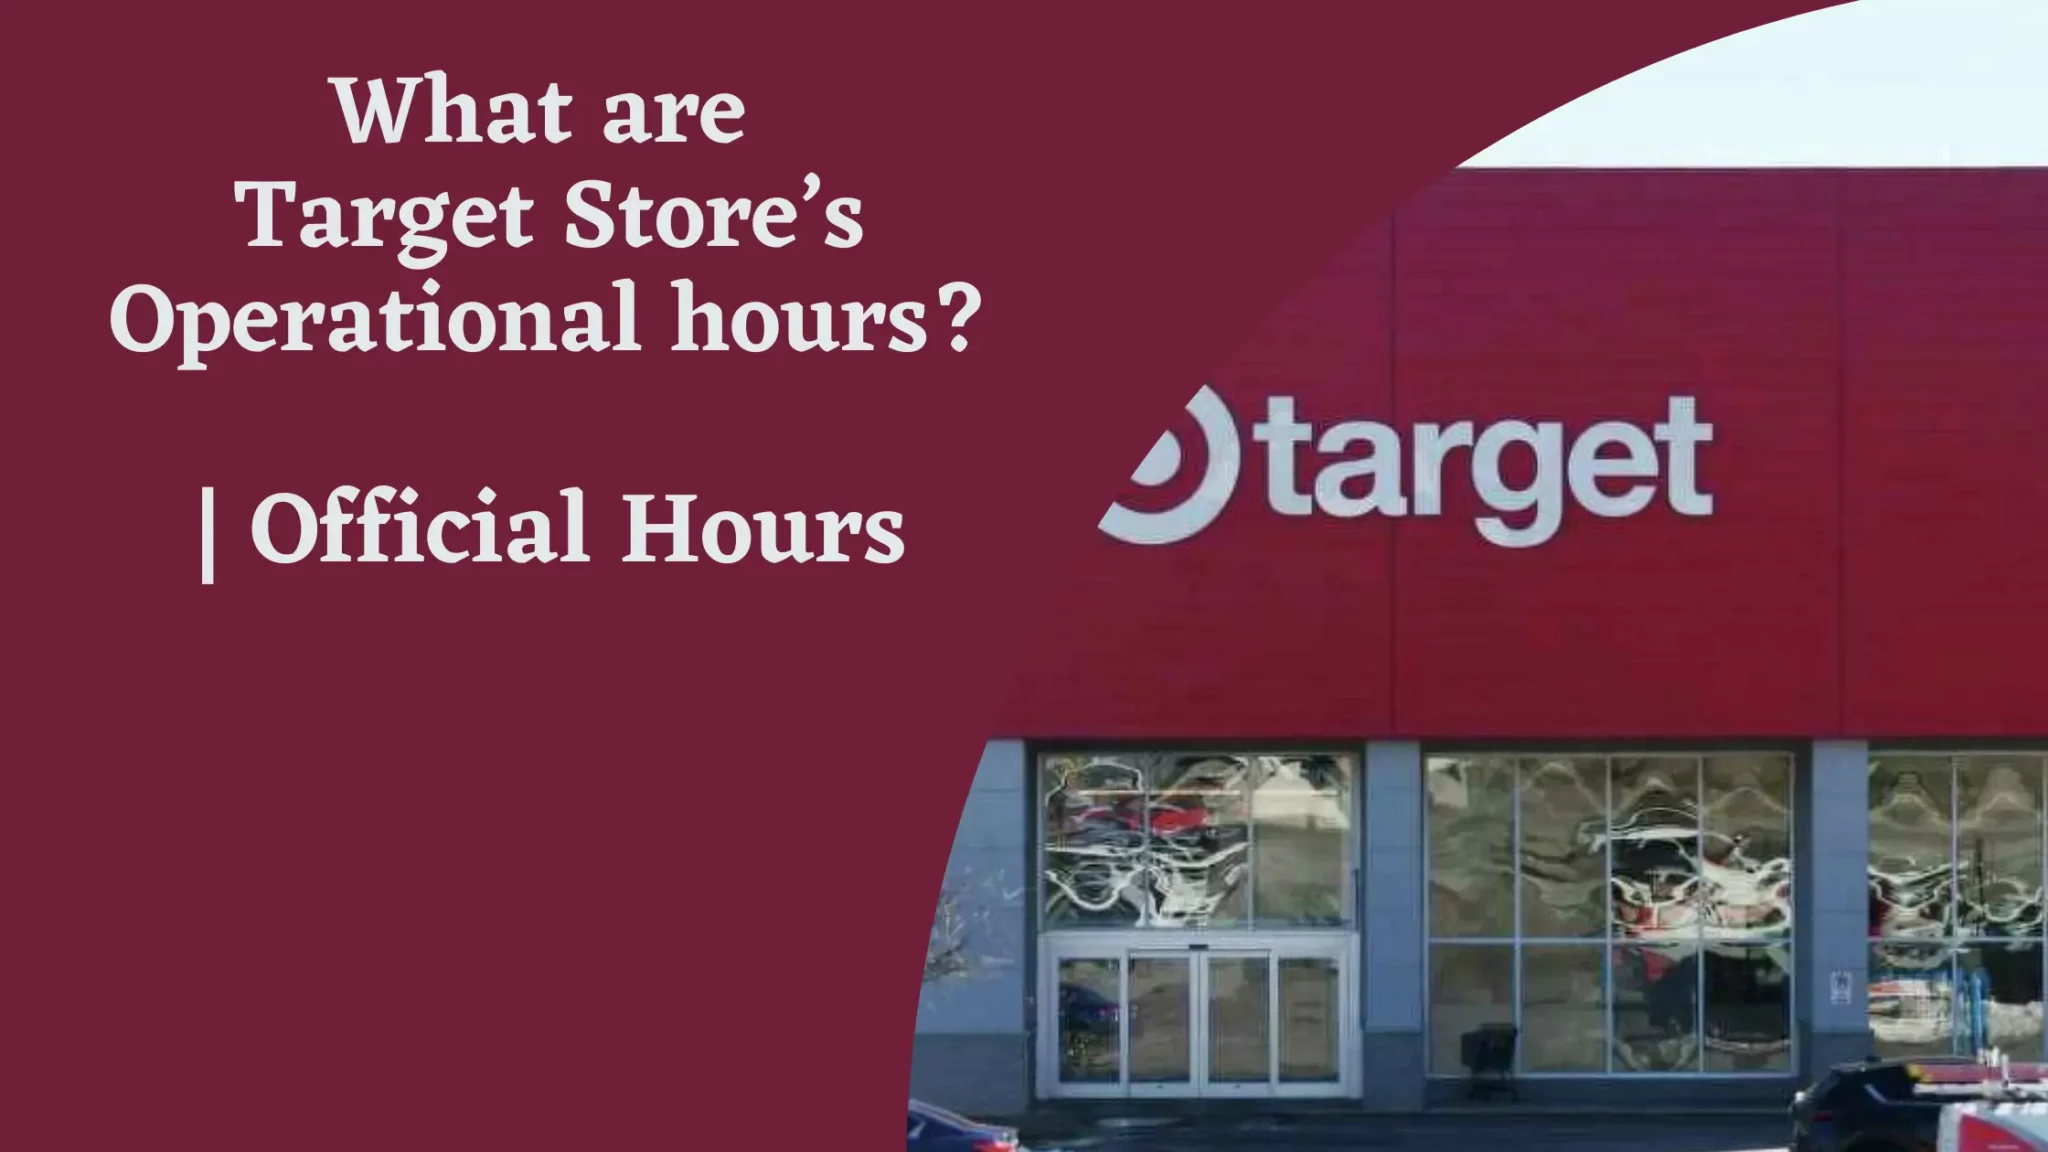 What are Target Store’s Operational hours?